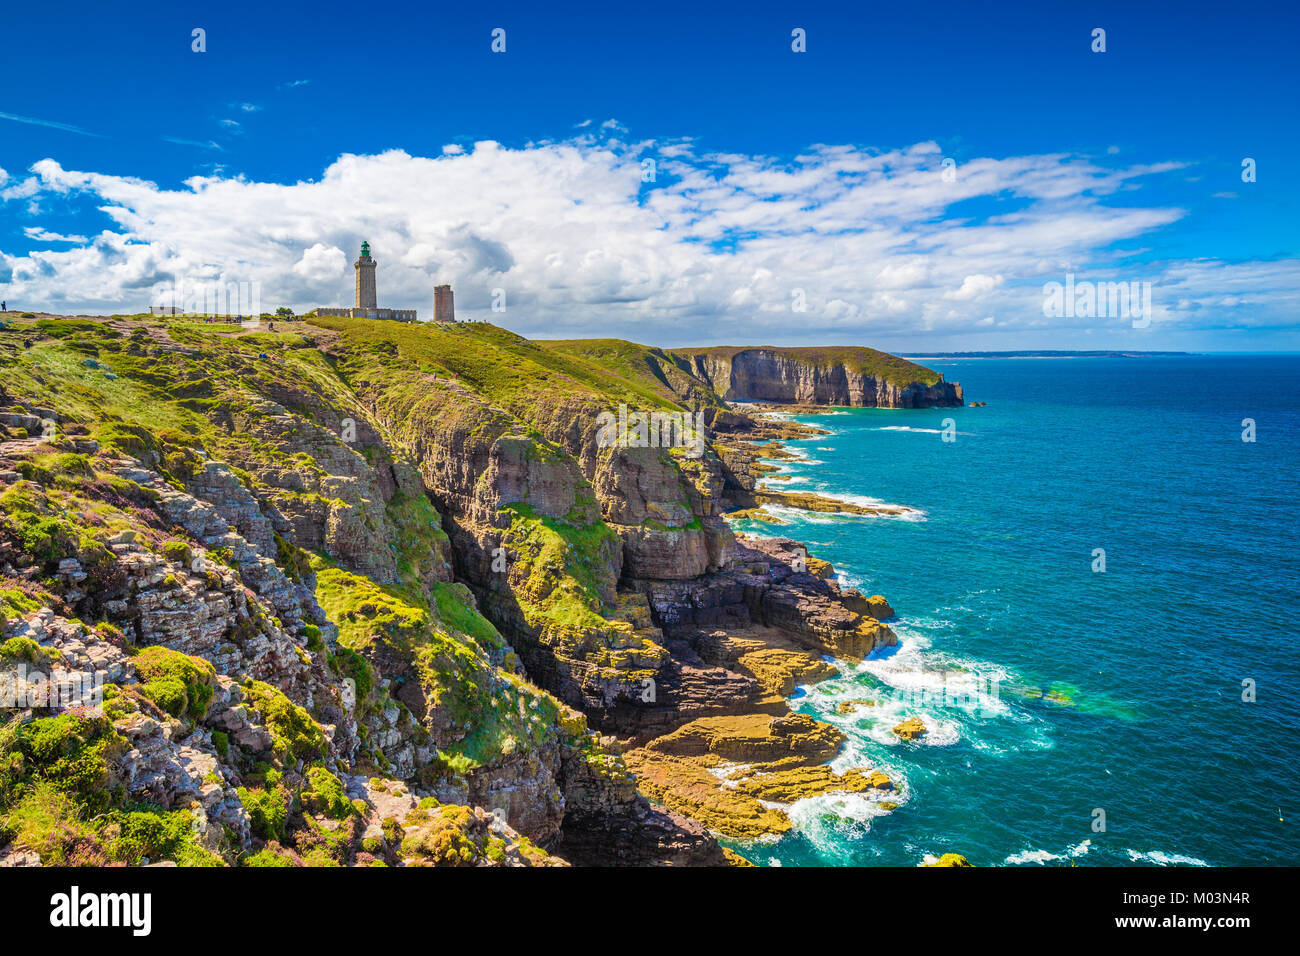 Panoramic view of scenic coastal landscape with traditional lighthouse at famous Cap Frehel peninsula on the Cote d'Emeraude, commune of Plevenon, Cot Stock Photo